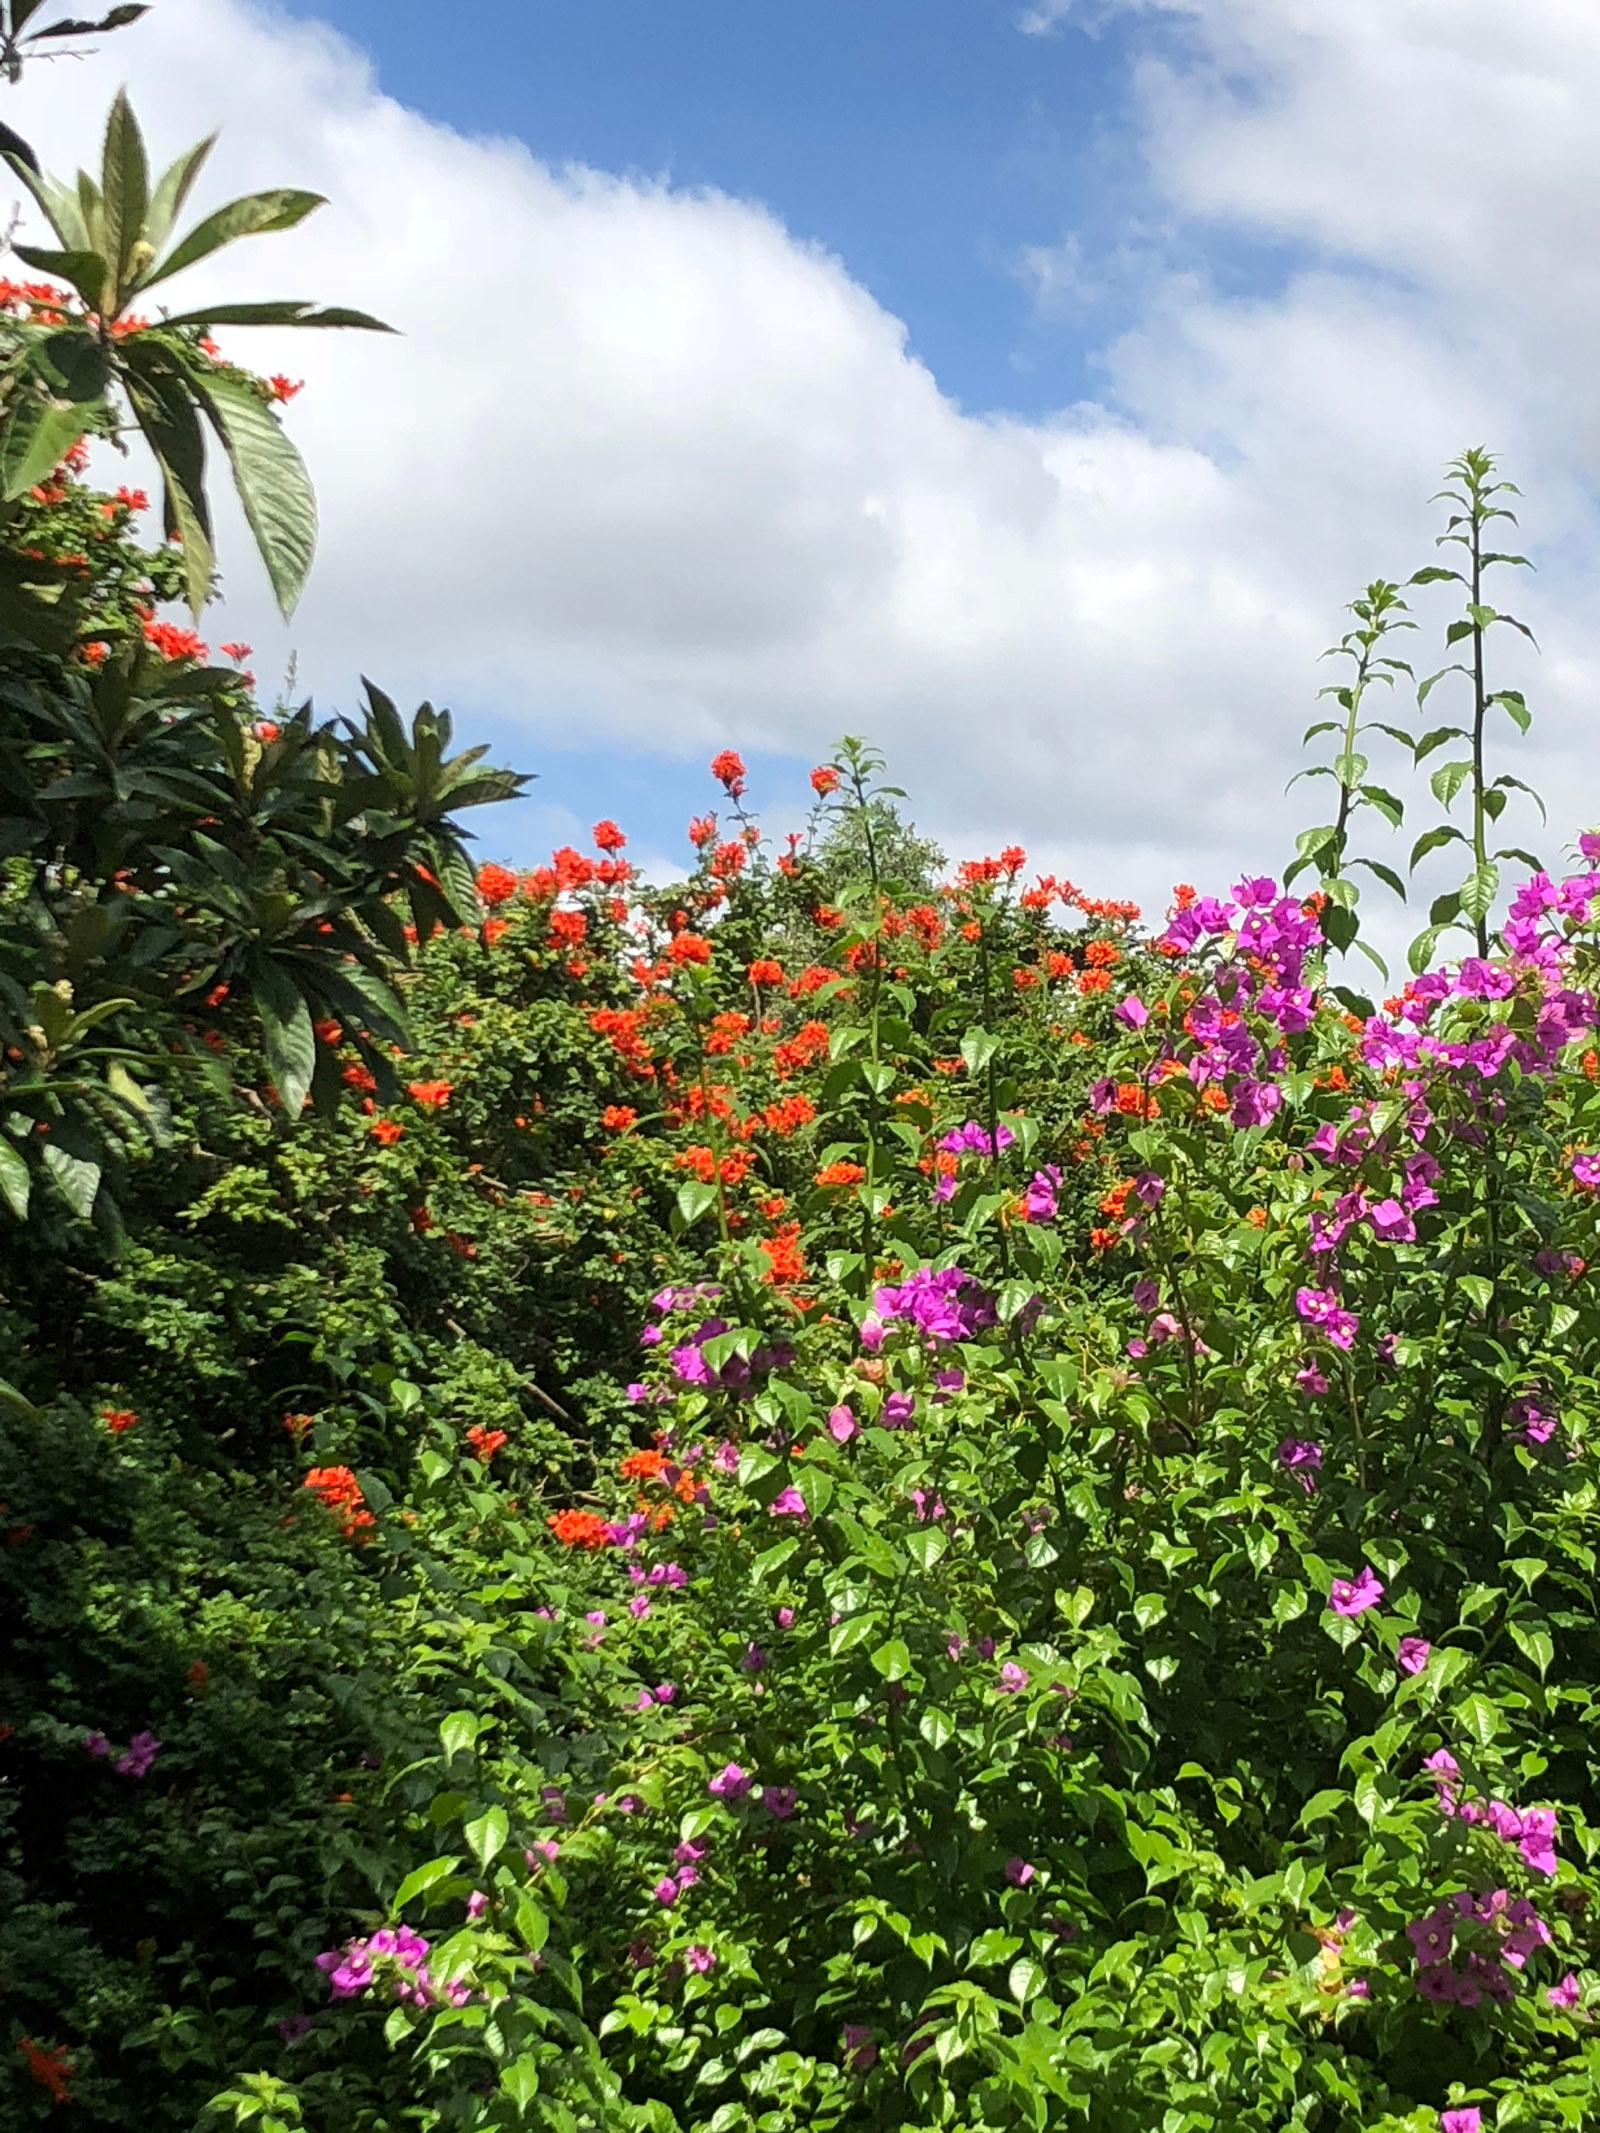 the orange-red flowers of Tecoma capensis clash with the pink-purple from the bougainvillea